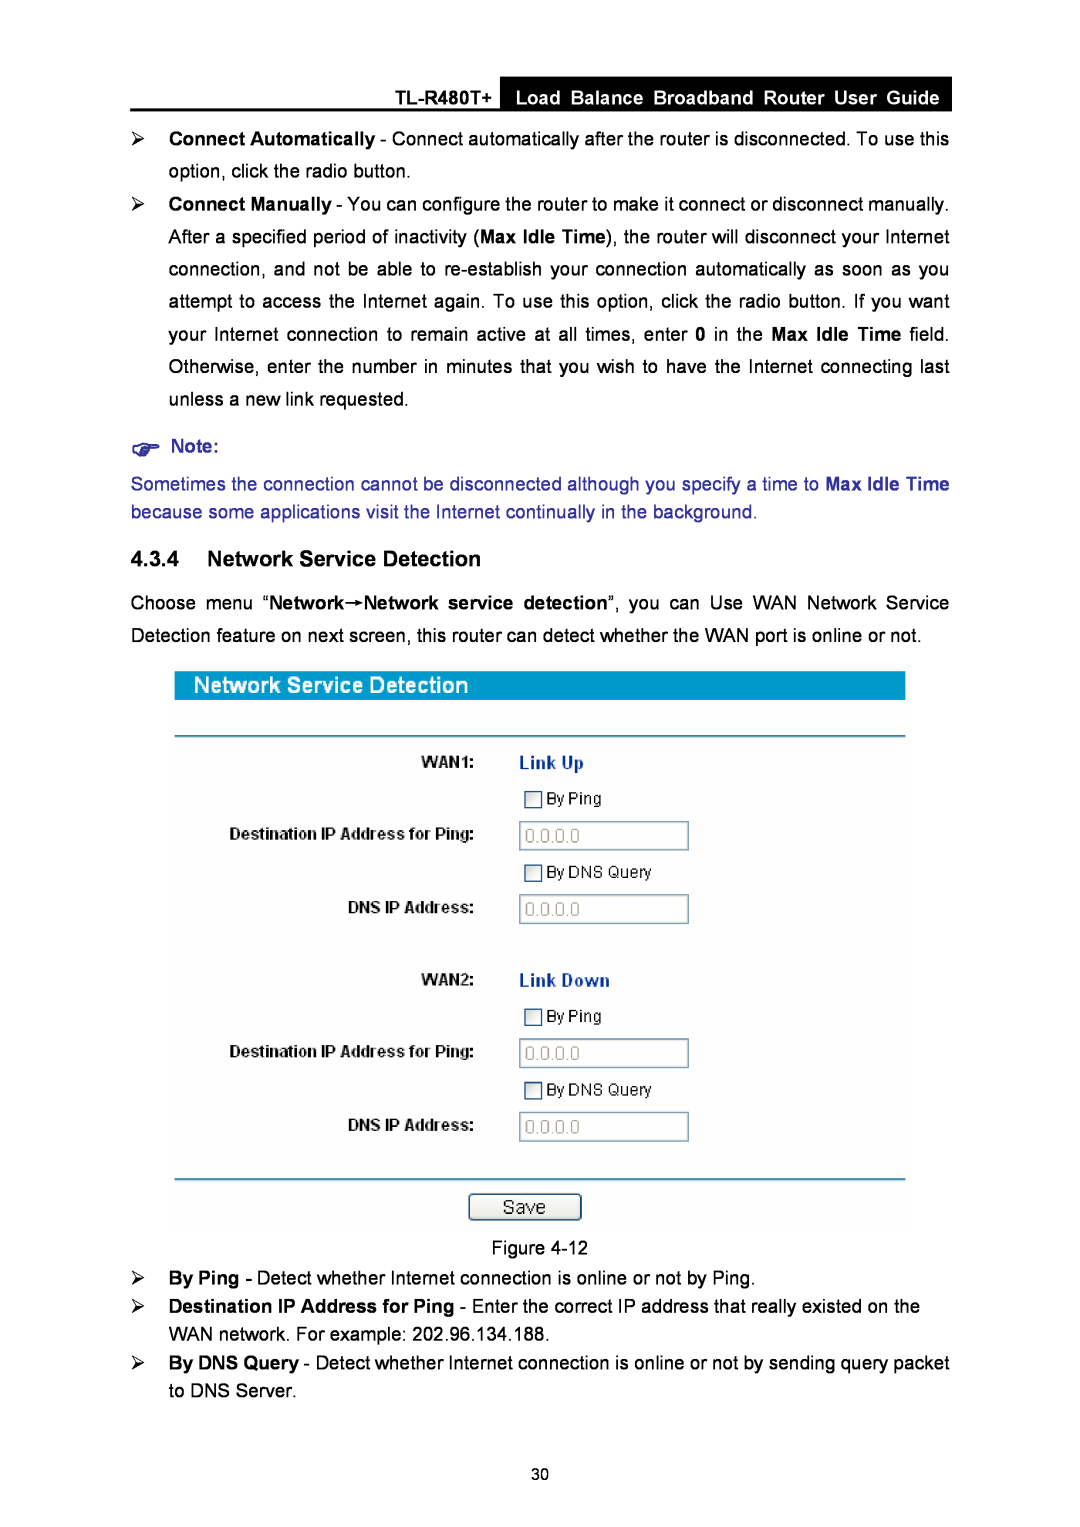 TP-Link TL-R480T+ manual Network Service Detection, Load Balance Broadband Router User Guide 